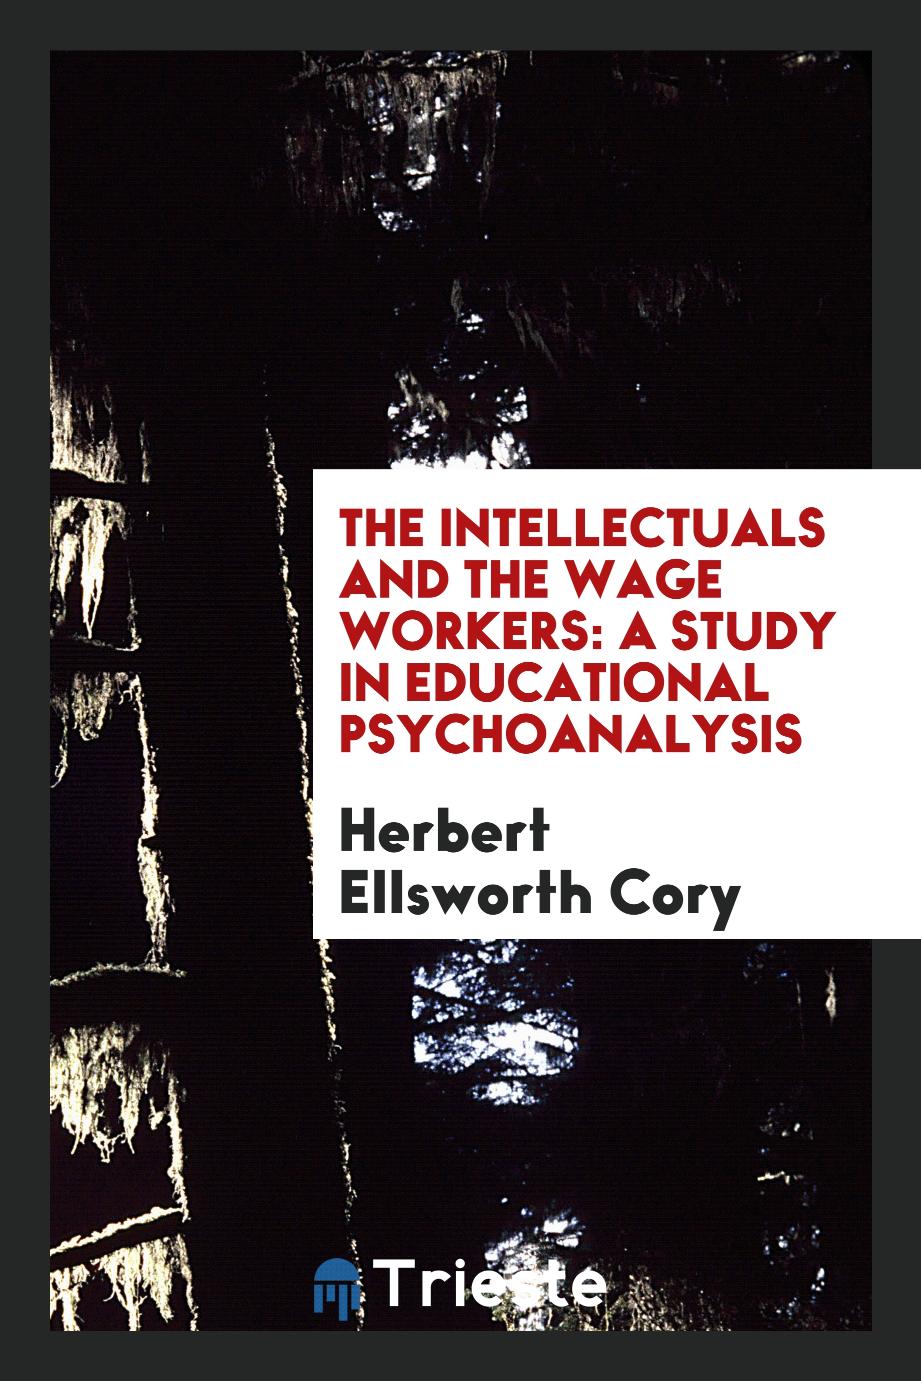 The intellectuals and the wage workers: a study in educational psychoanalysis